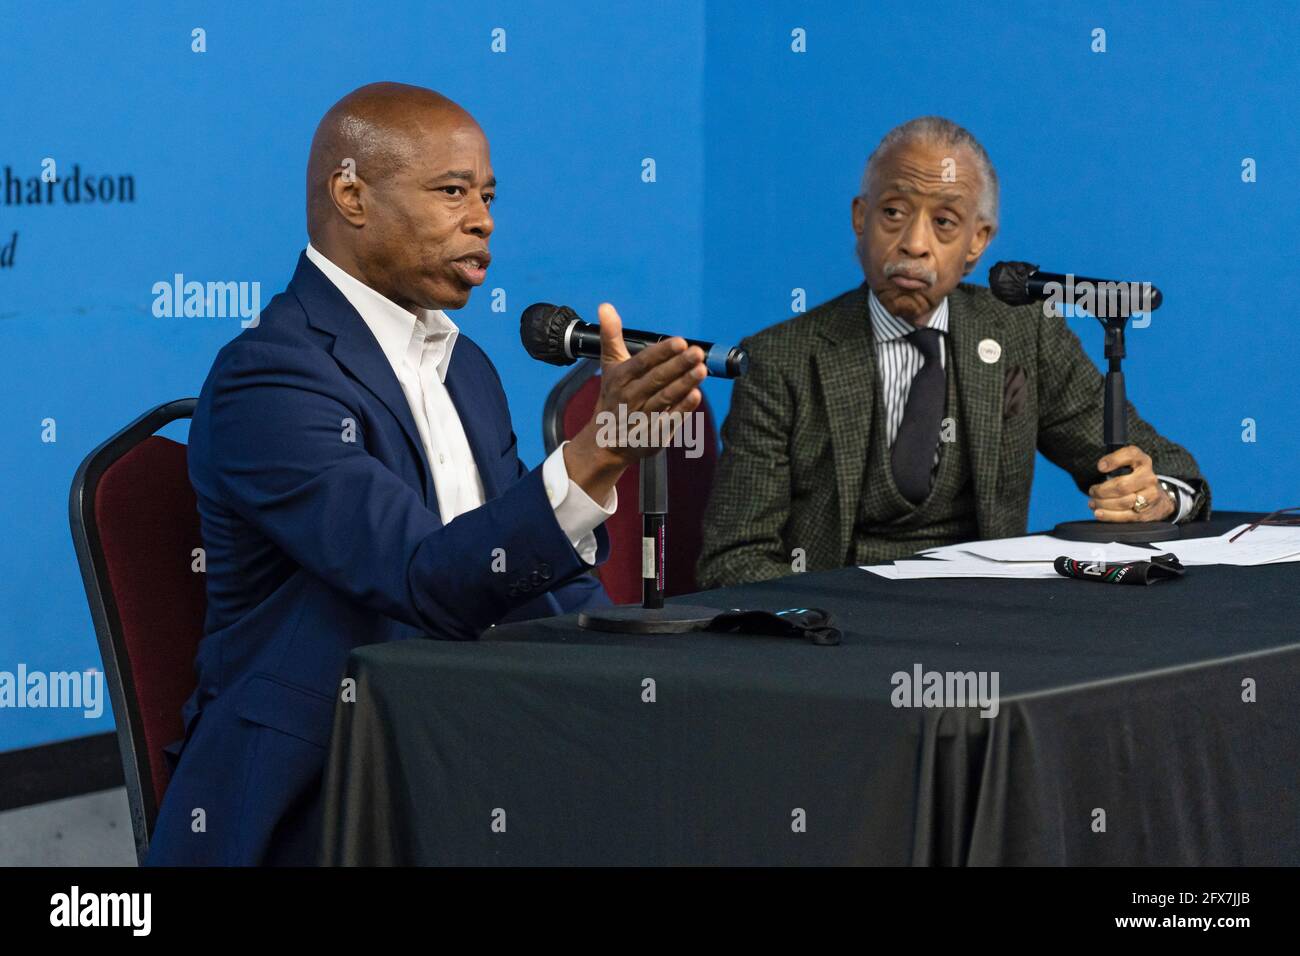 New York, USA. 25th May 2021. Brooklyn Borough President Eric Adams speaks  at the National Action Network's Mayoral Forum on May 25, 2021 in New York  City. Leading New York City democratic